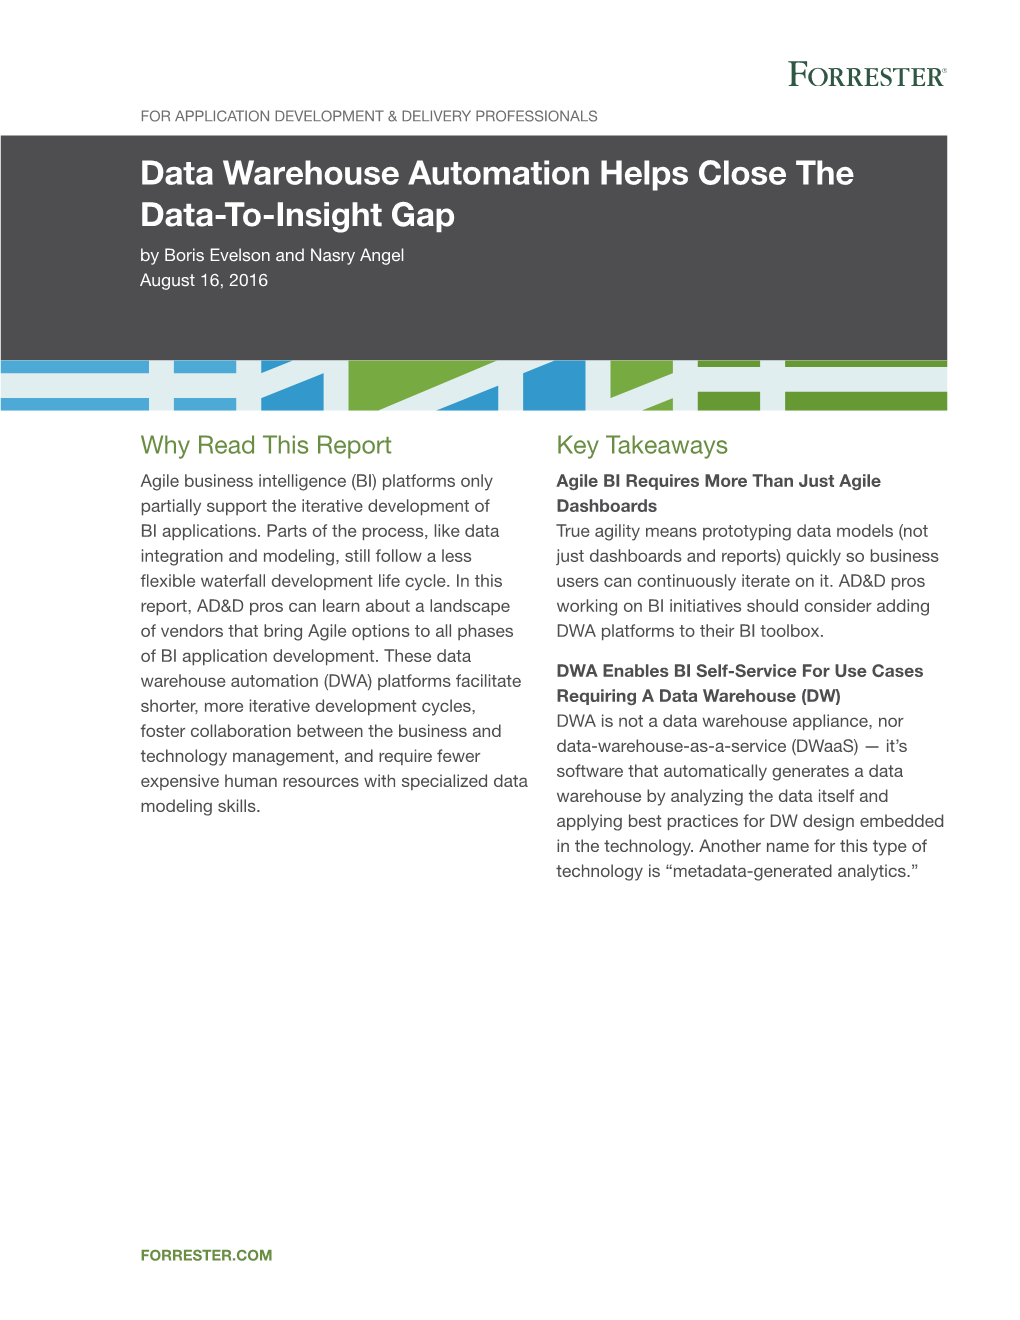 Data Warehouse Automation Helps Close the Data-To-Insight Gap by Boris Evelson and Nasry Angel August 16, 2016